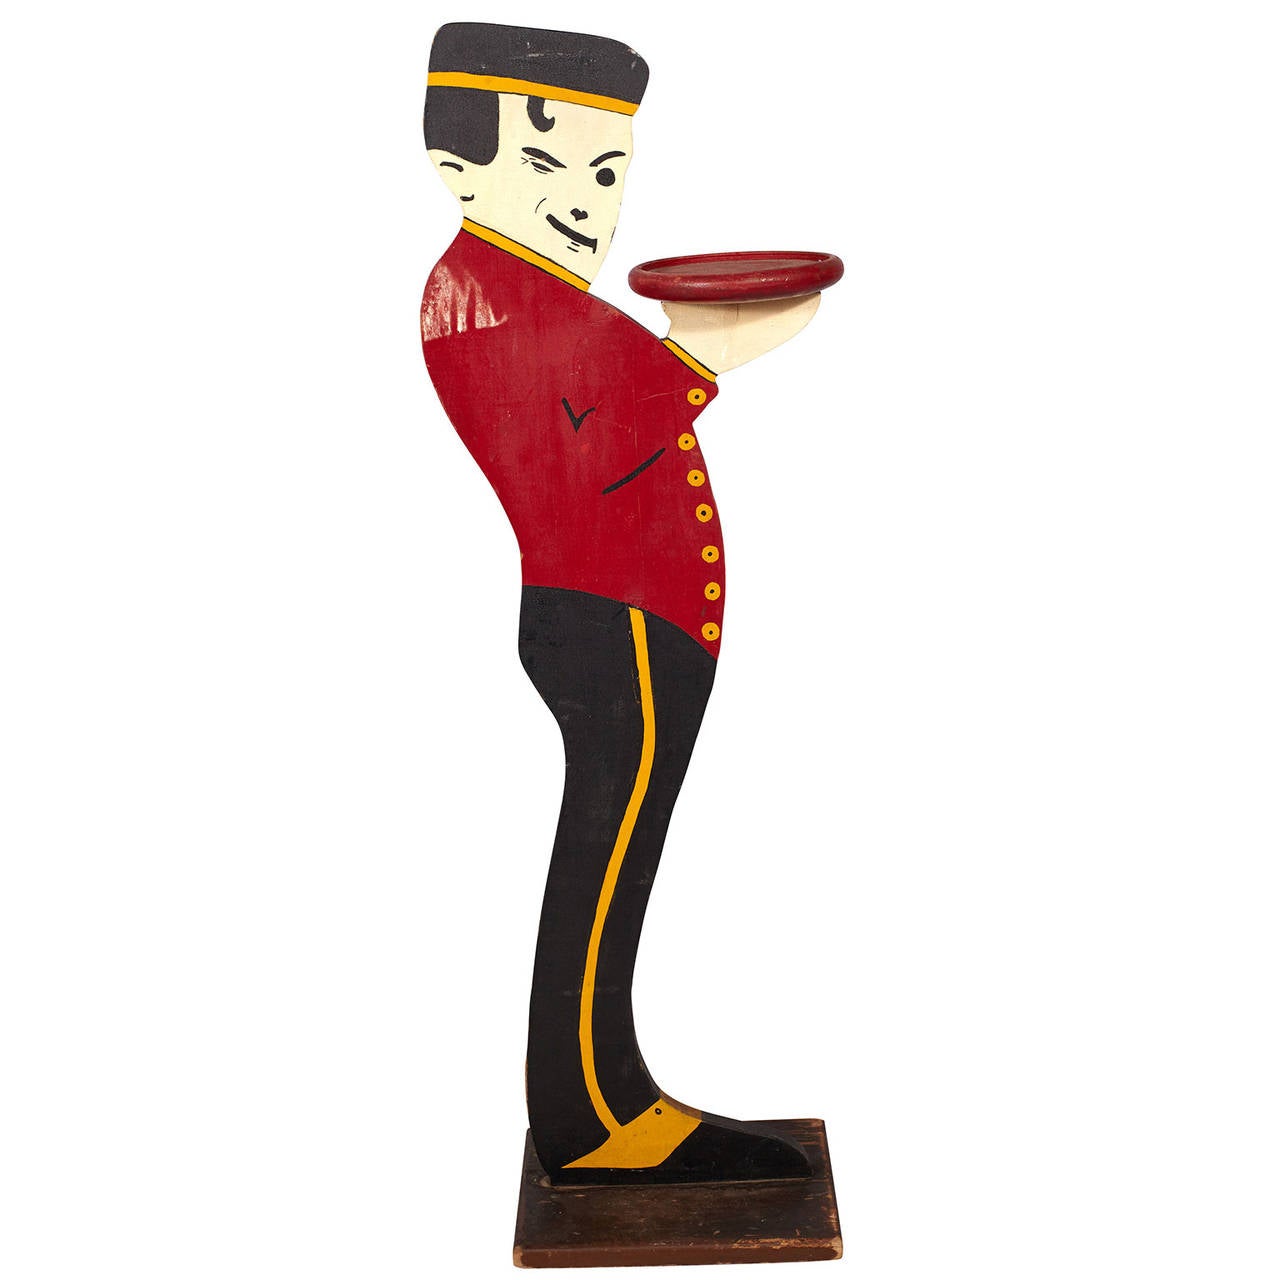 A vintage pedestal of a winking bellhop holding a tray; original paint on wood. Both sides of piece are painted.